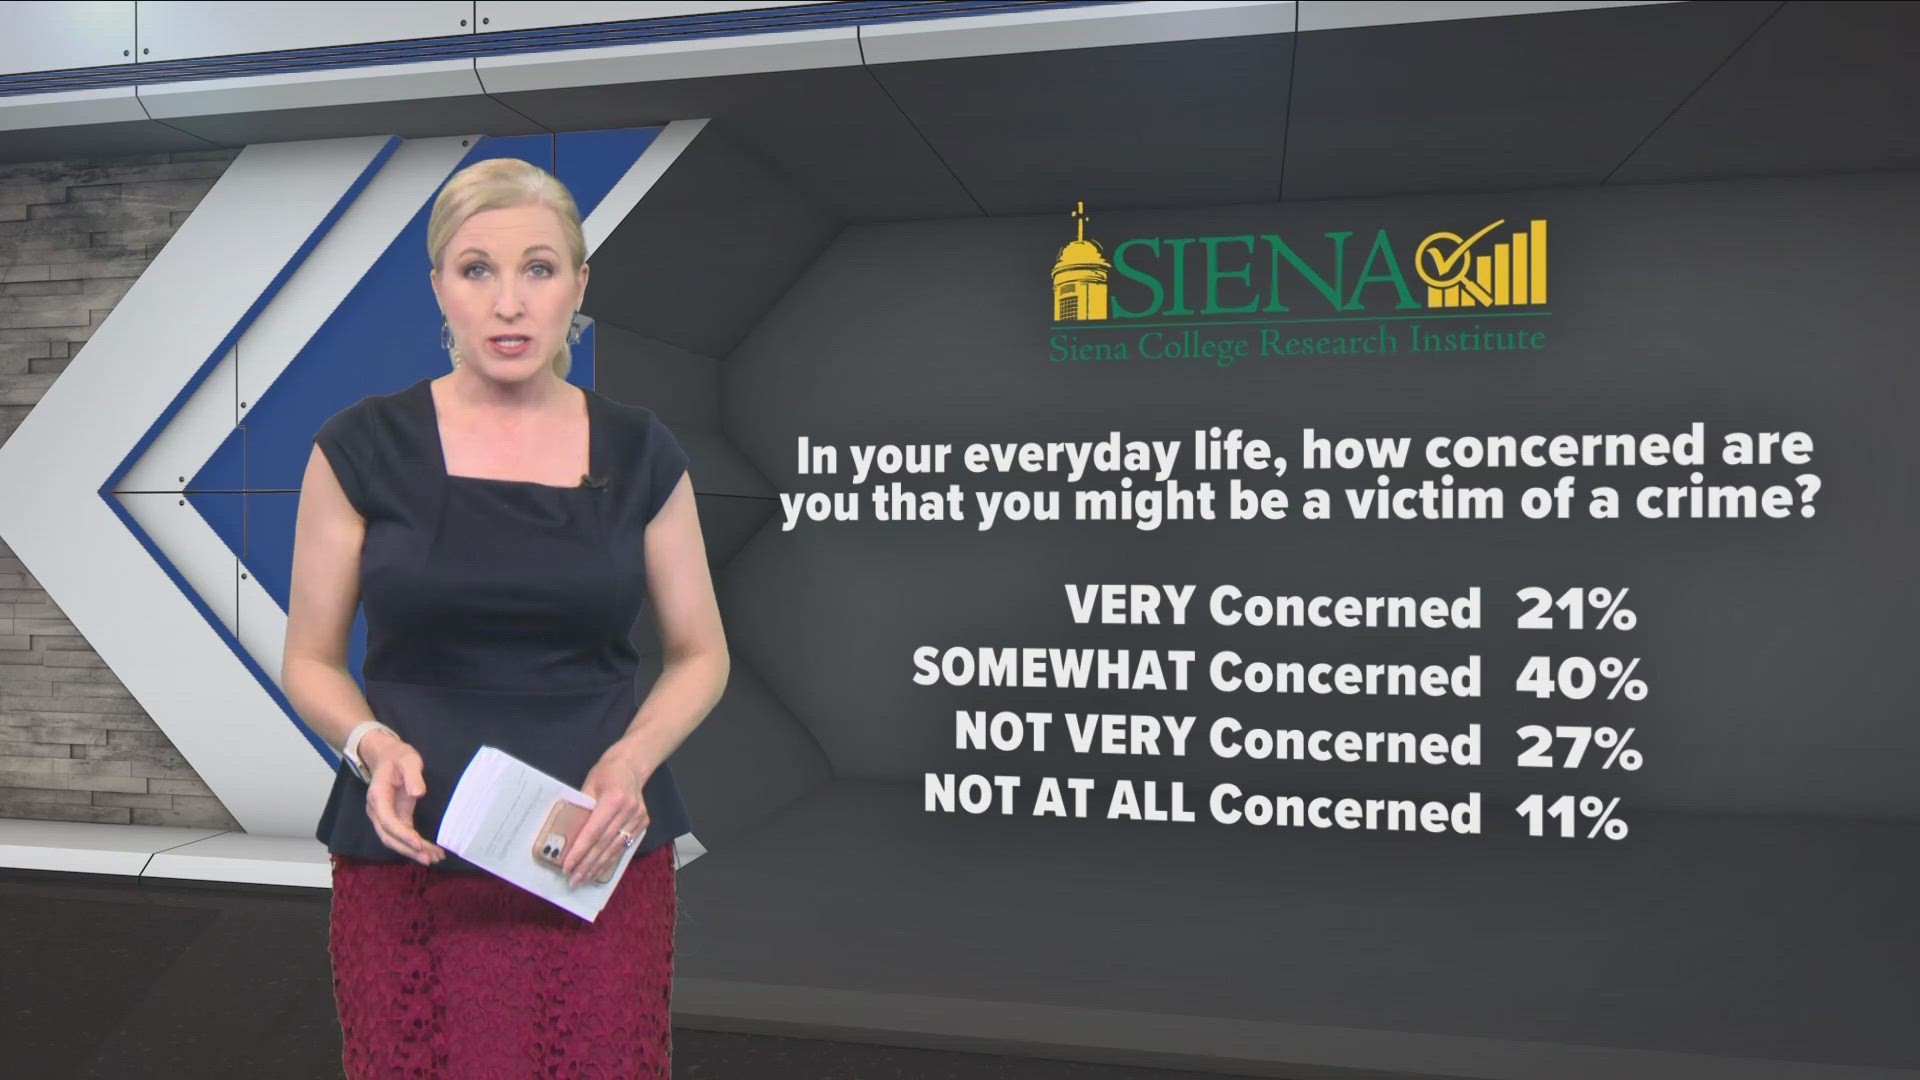 A new Siena Poll says 61% of New Yorkers are worried about being victims of a crime.